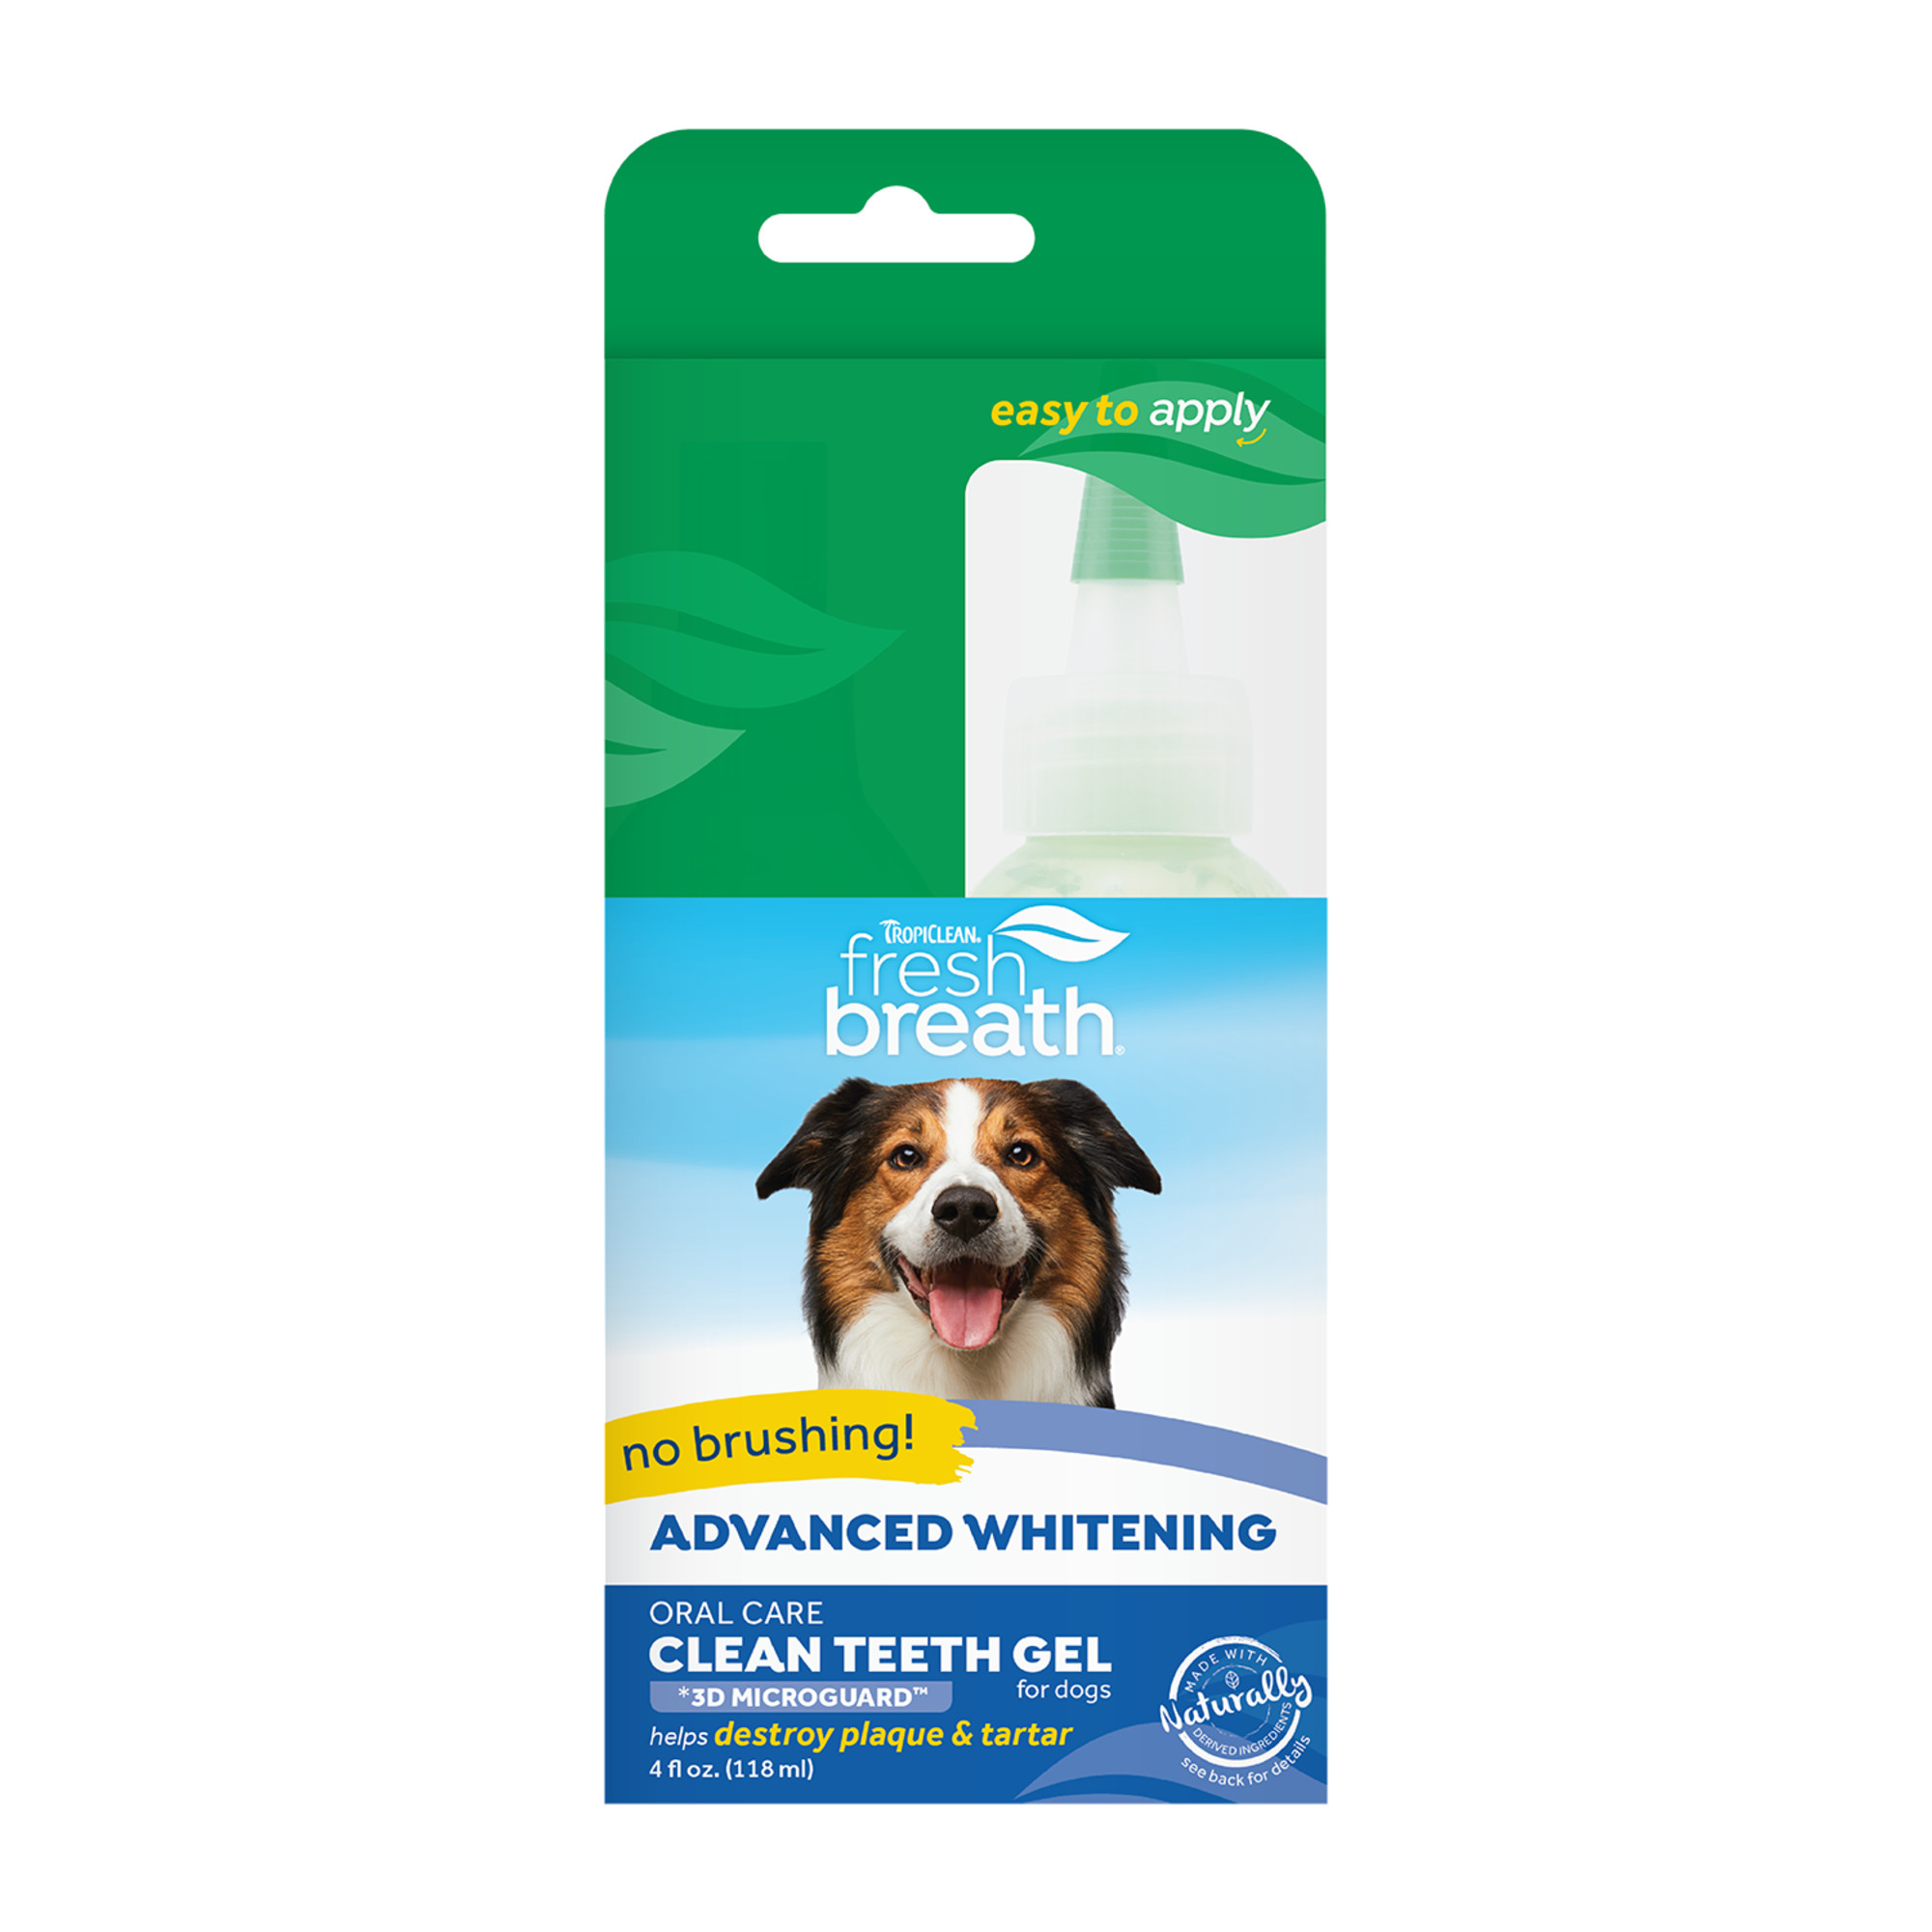 Advanced Whitening Oral Care Gel for Dogs